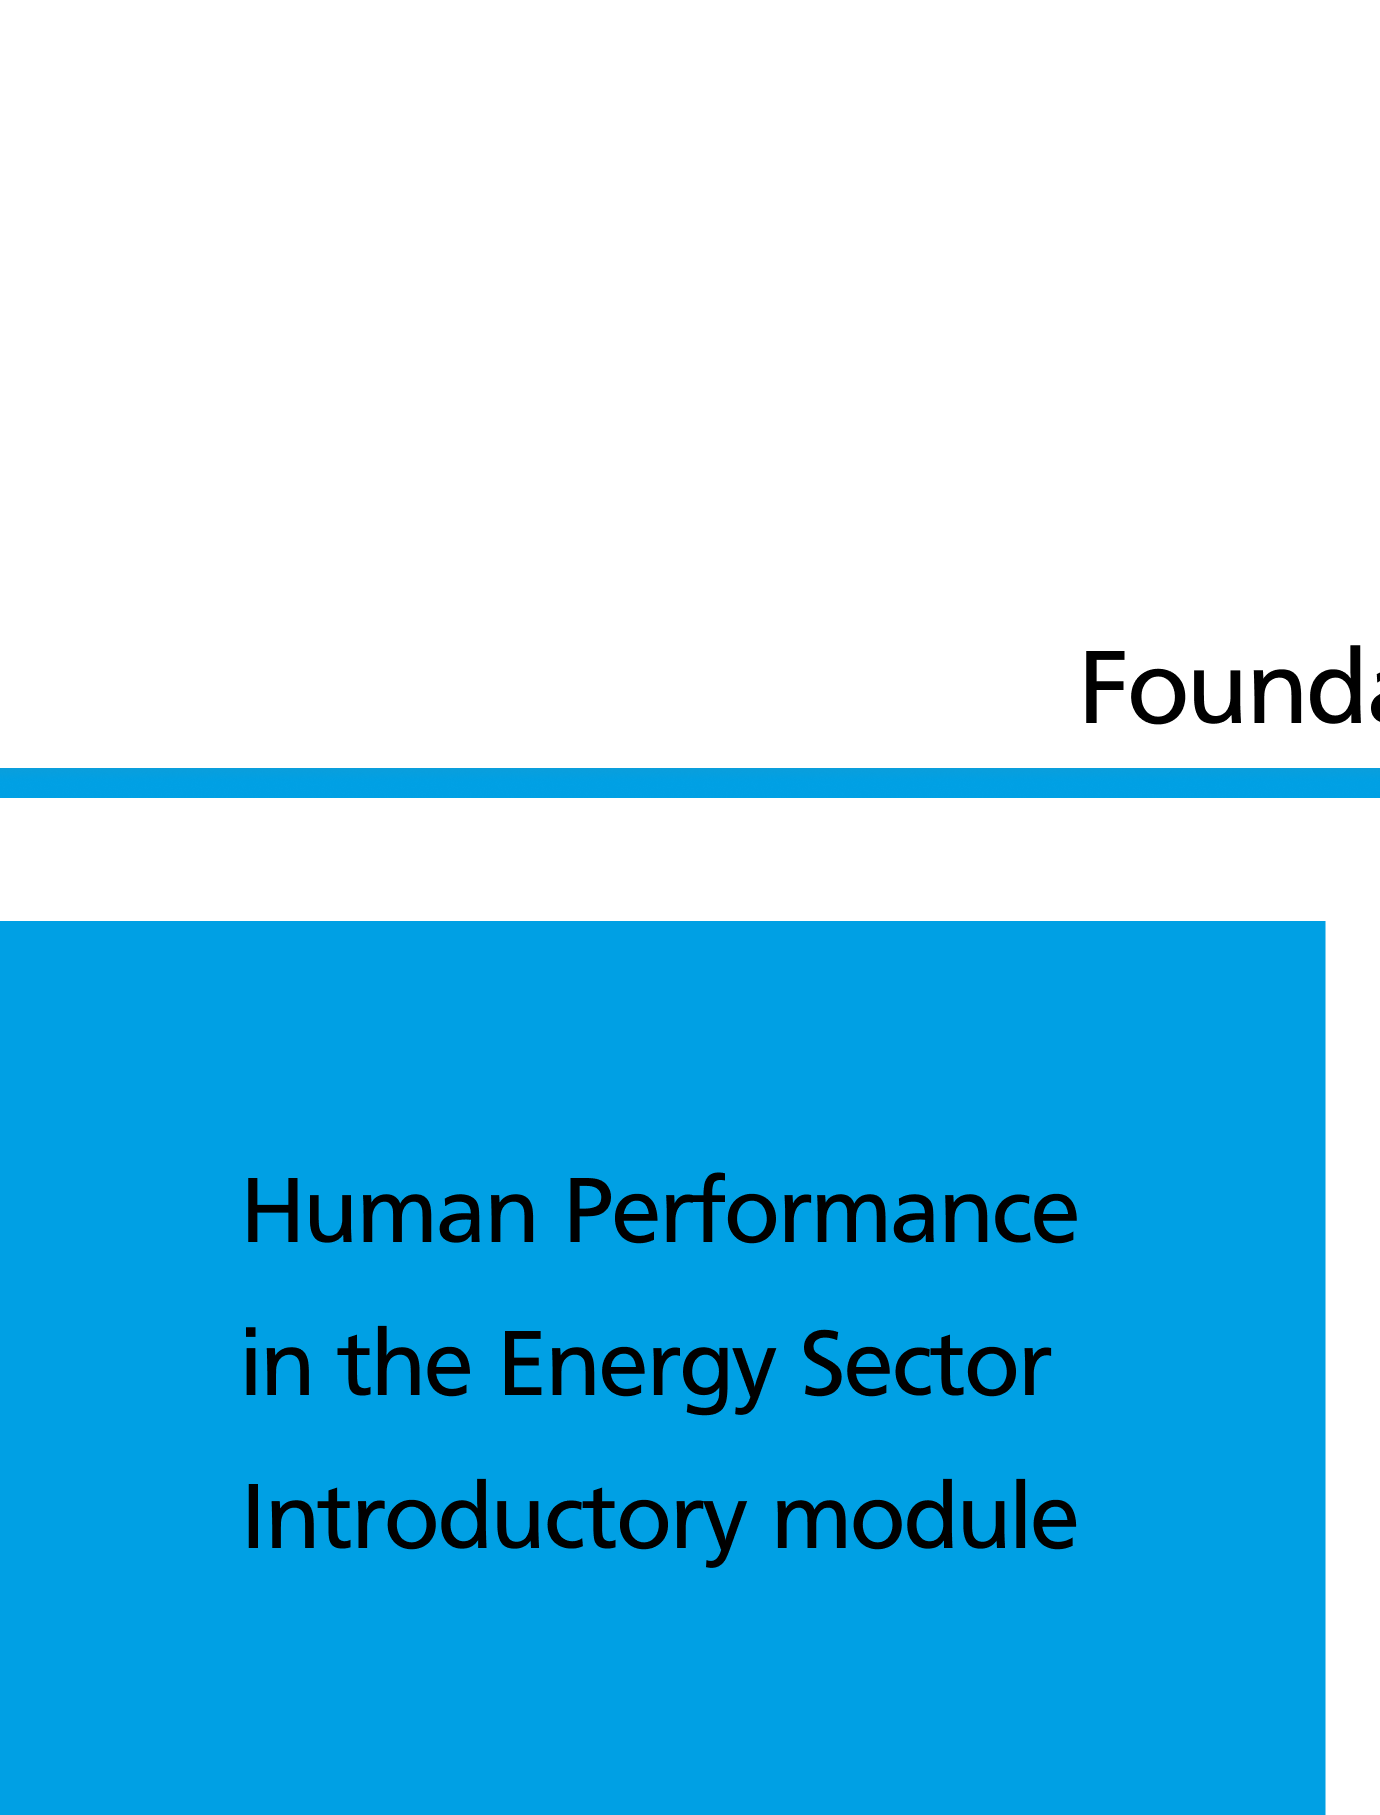 Human Performance in the Energy Sector Introductory module